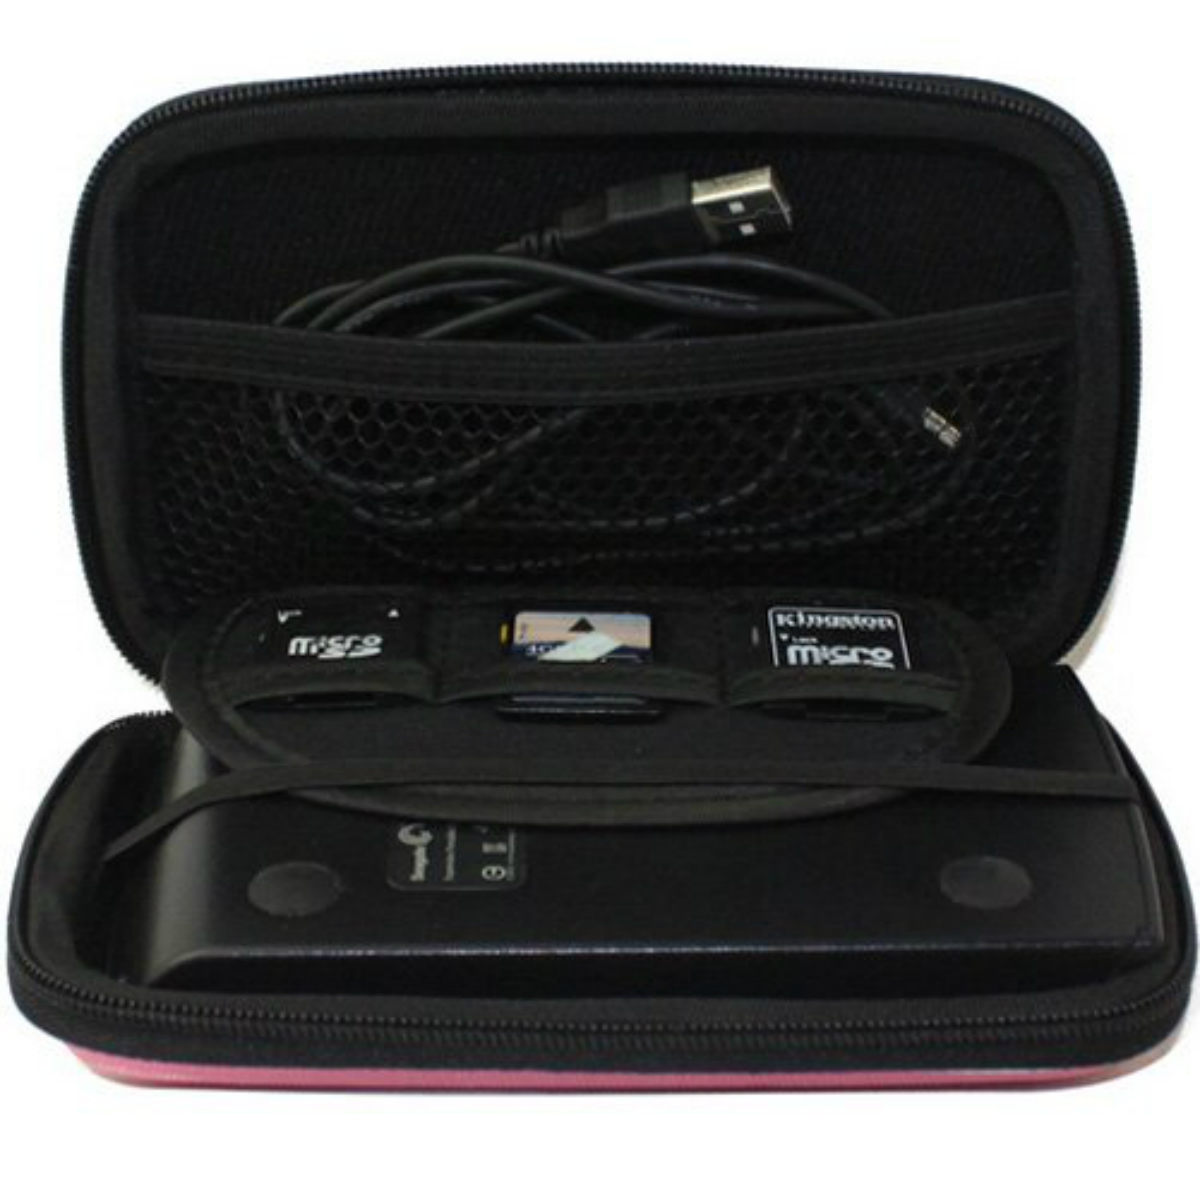 Portable External Hard Drive Disk Pouch Bag HDD Carry Cover USB Cable Storage Case Organizer Bag for Hard Disk Earphone Storage Case